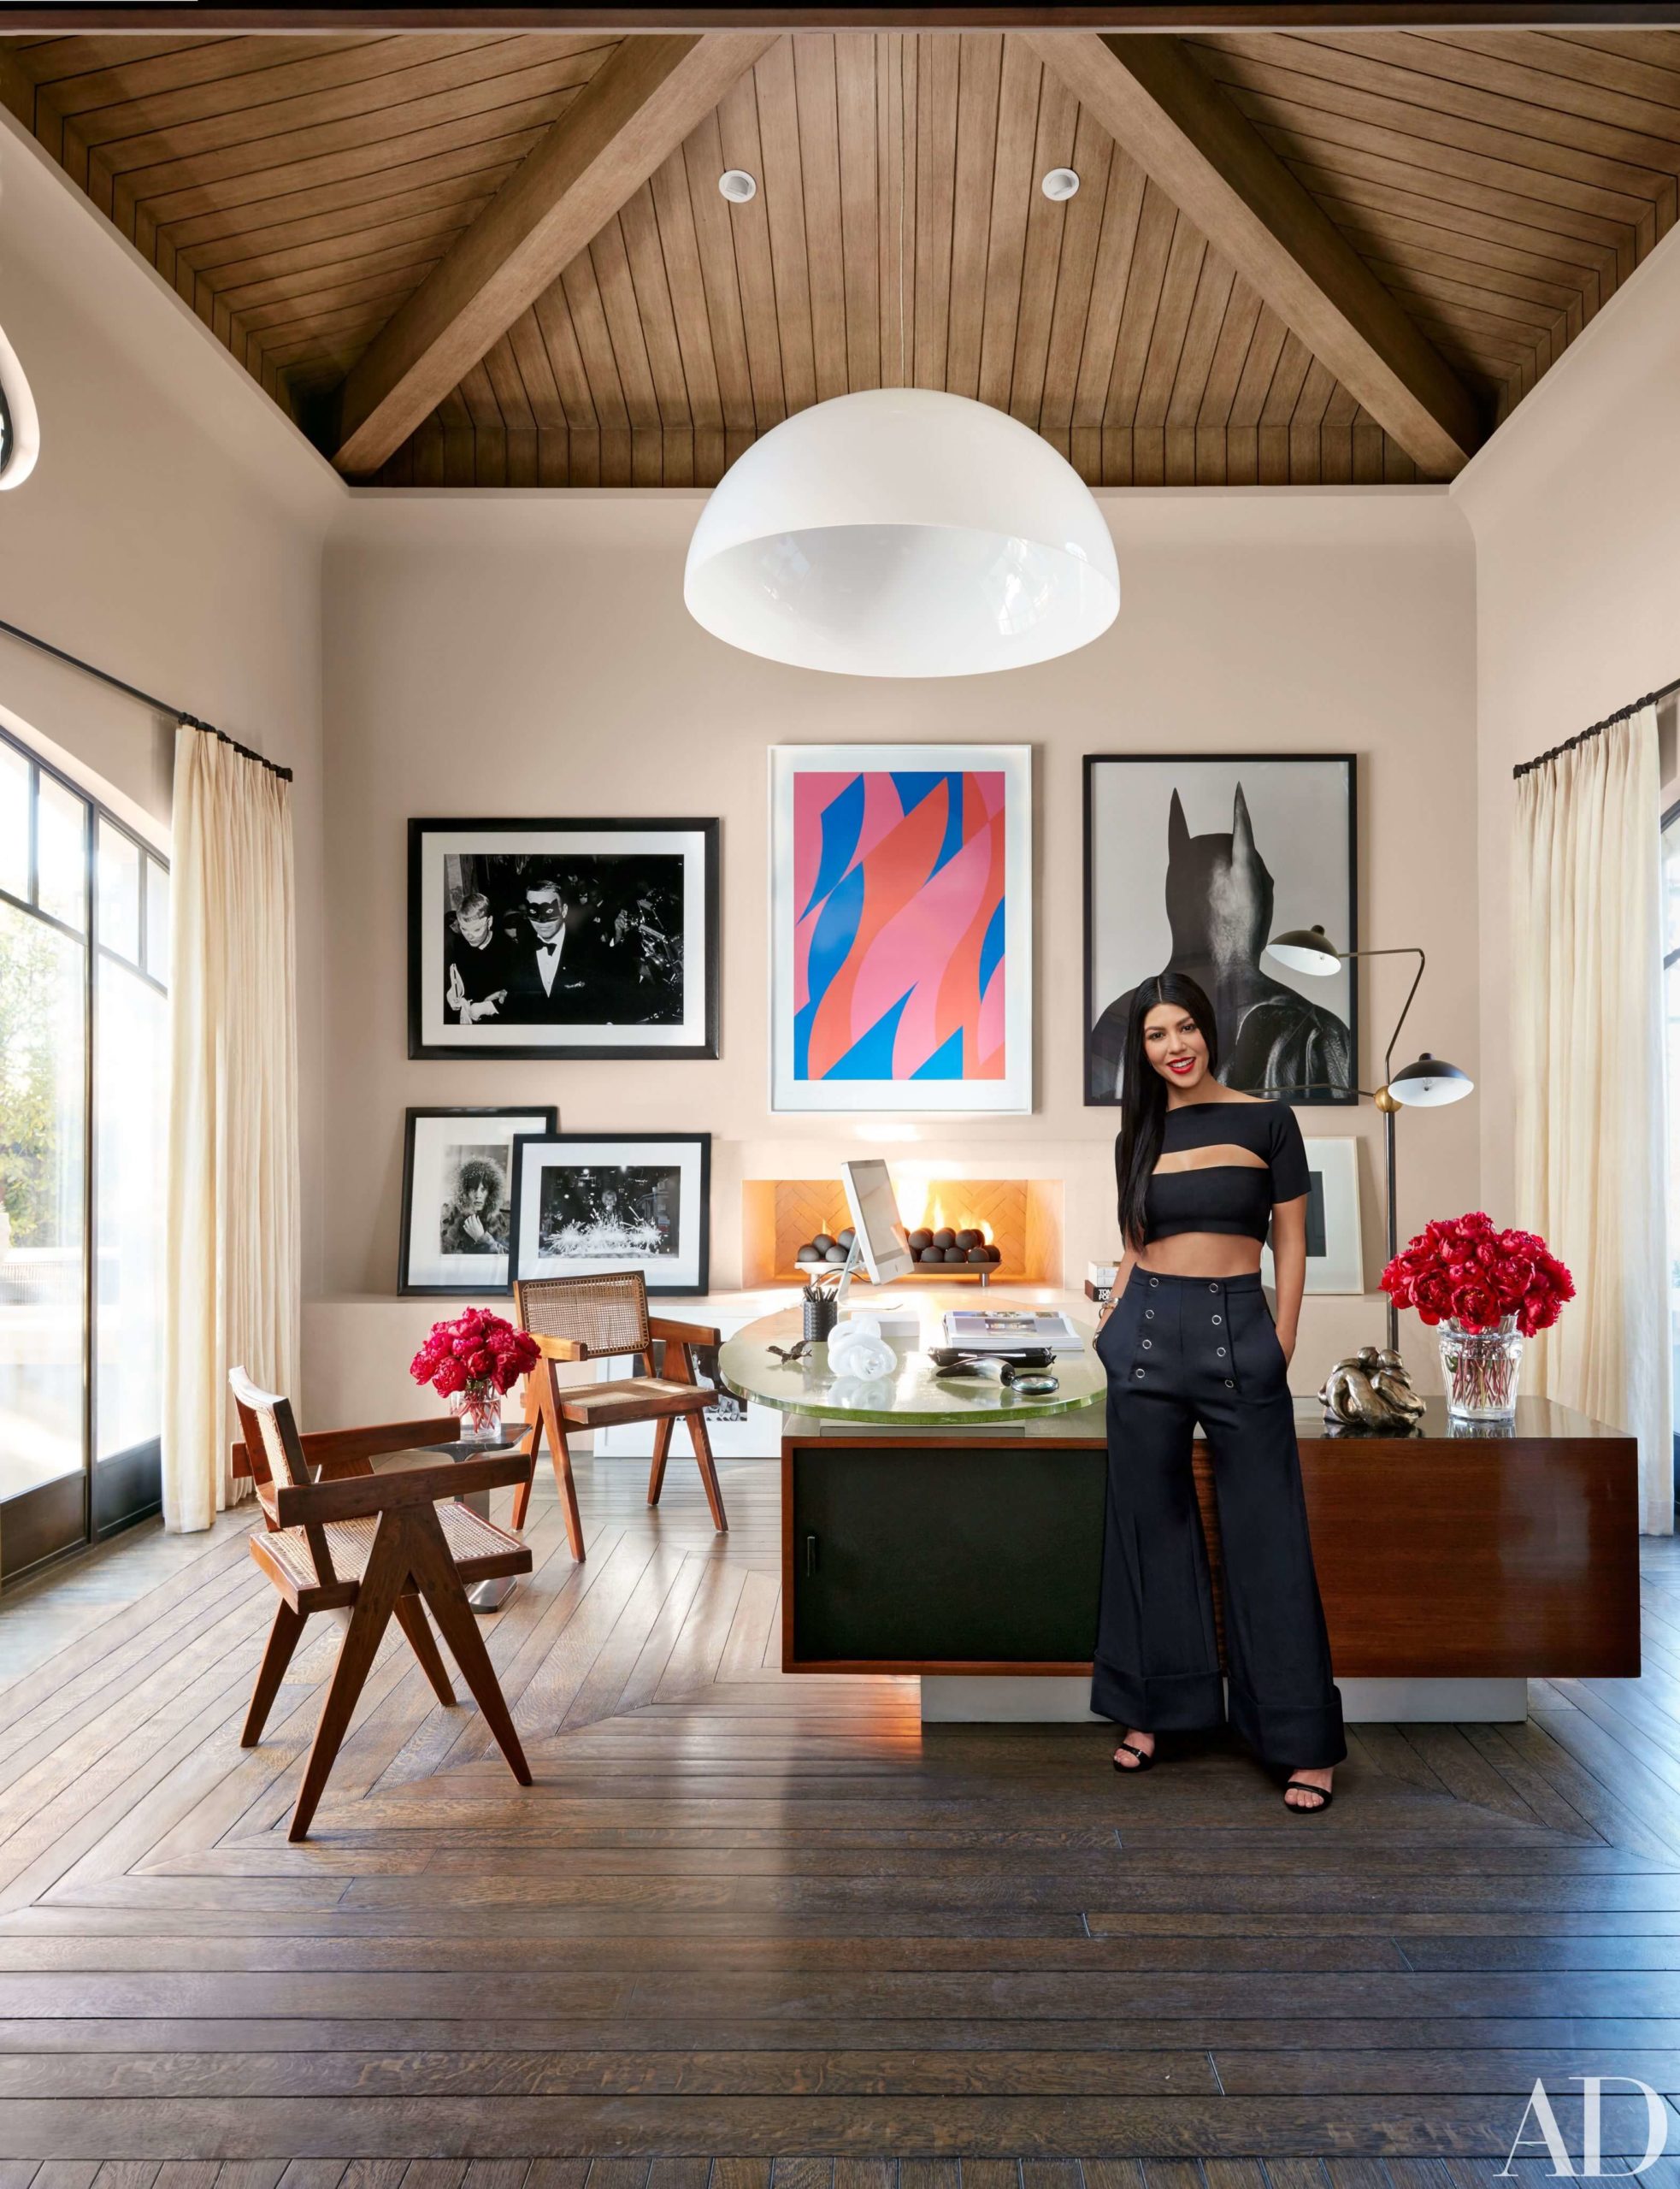 Kylie Jenner's Hidden Hills Home Is Equal Parts Sparkle and Sumptuousness